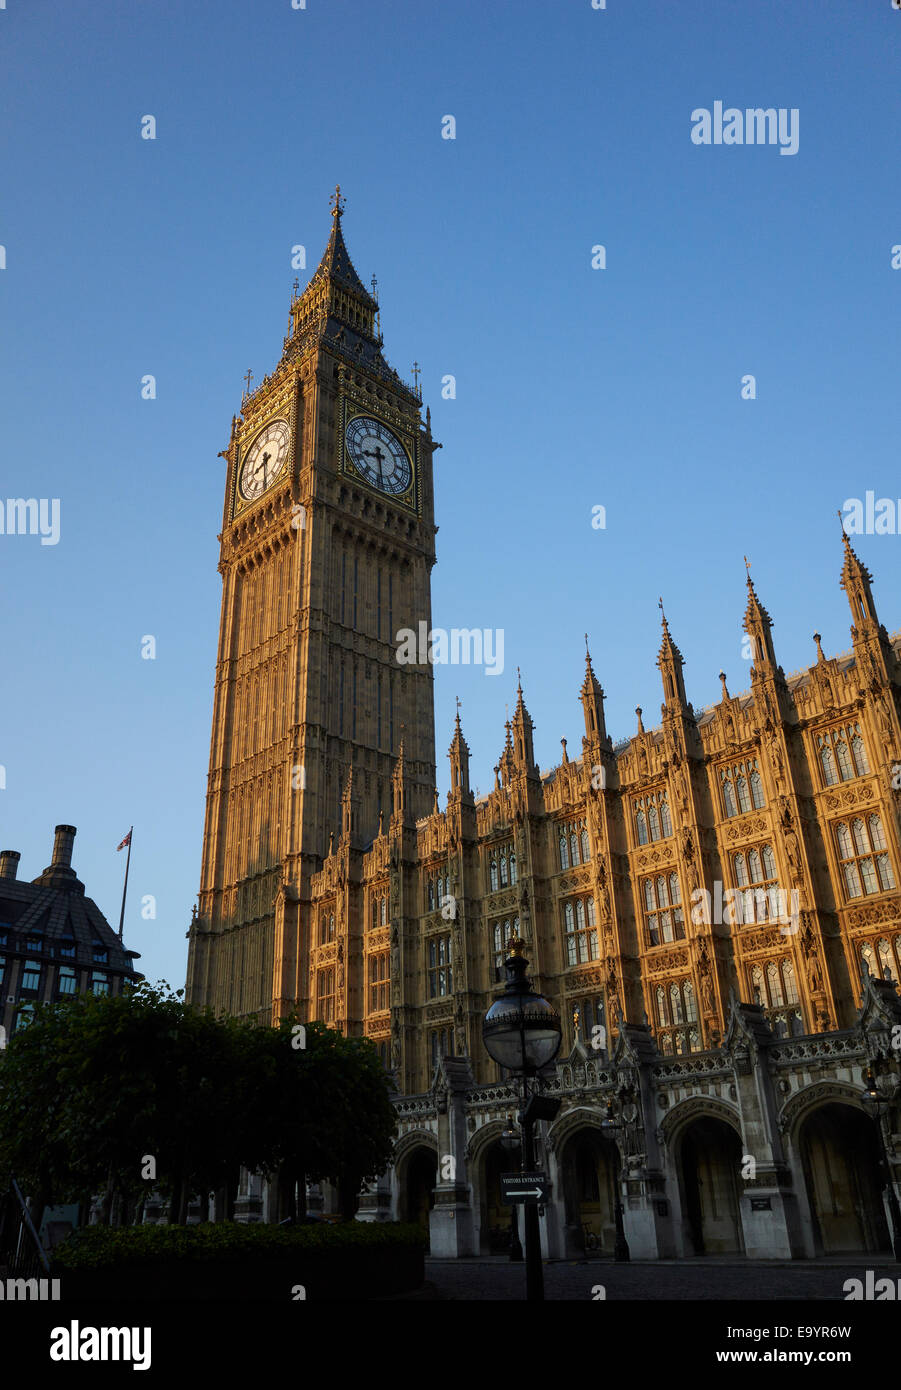 Queen Elizabeth Tower, also known as Big Ben, from New Palace Yard, Houses of Parliament, London UK Stock Photo